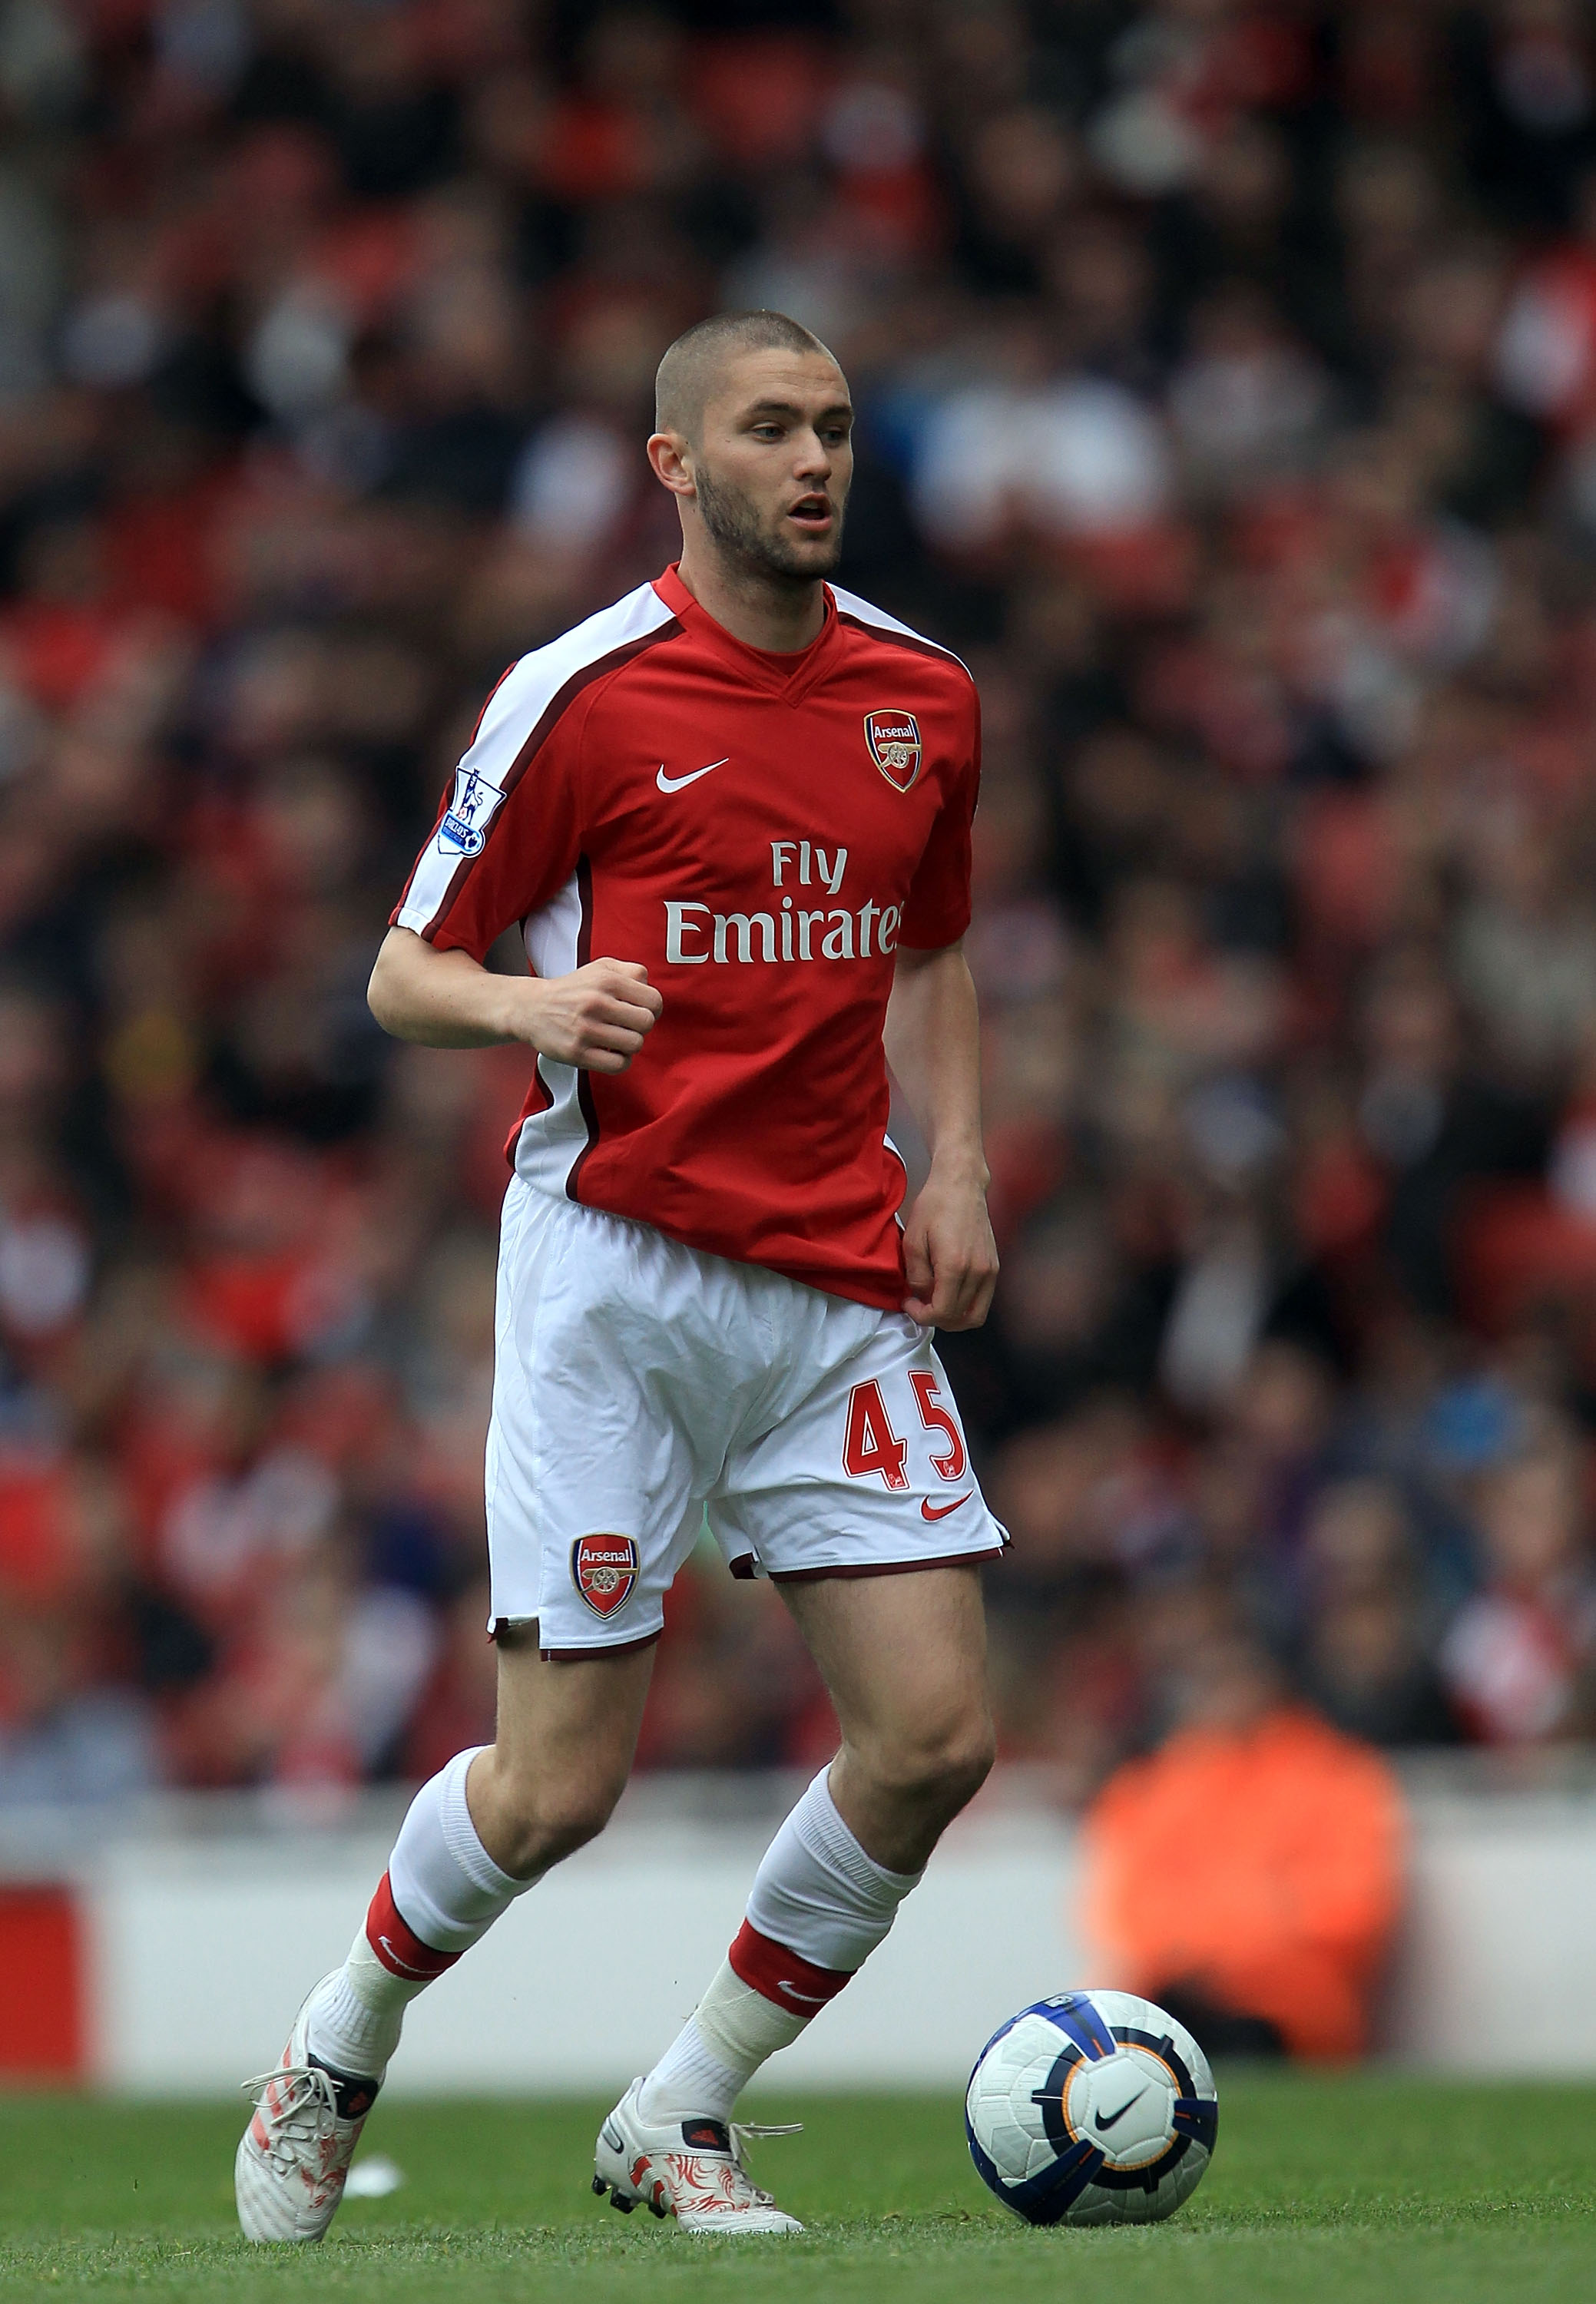 LONDON, ENGLAND - MAY 09: Henri Lansbury of Arsenal  during the Barclays Premier League match between Arsenal and Fulham at The Emirates Stadium on May 9, 2010 in London, England.  (Photo by David Cannon/Getty Images)